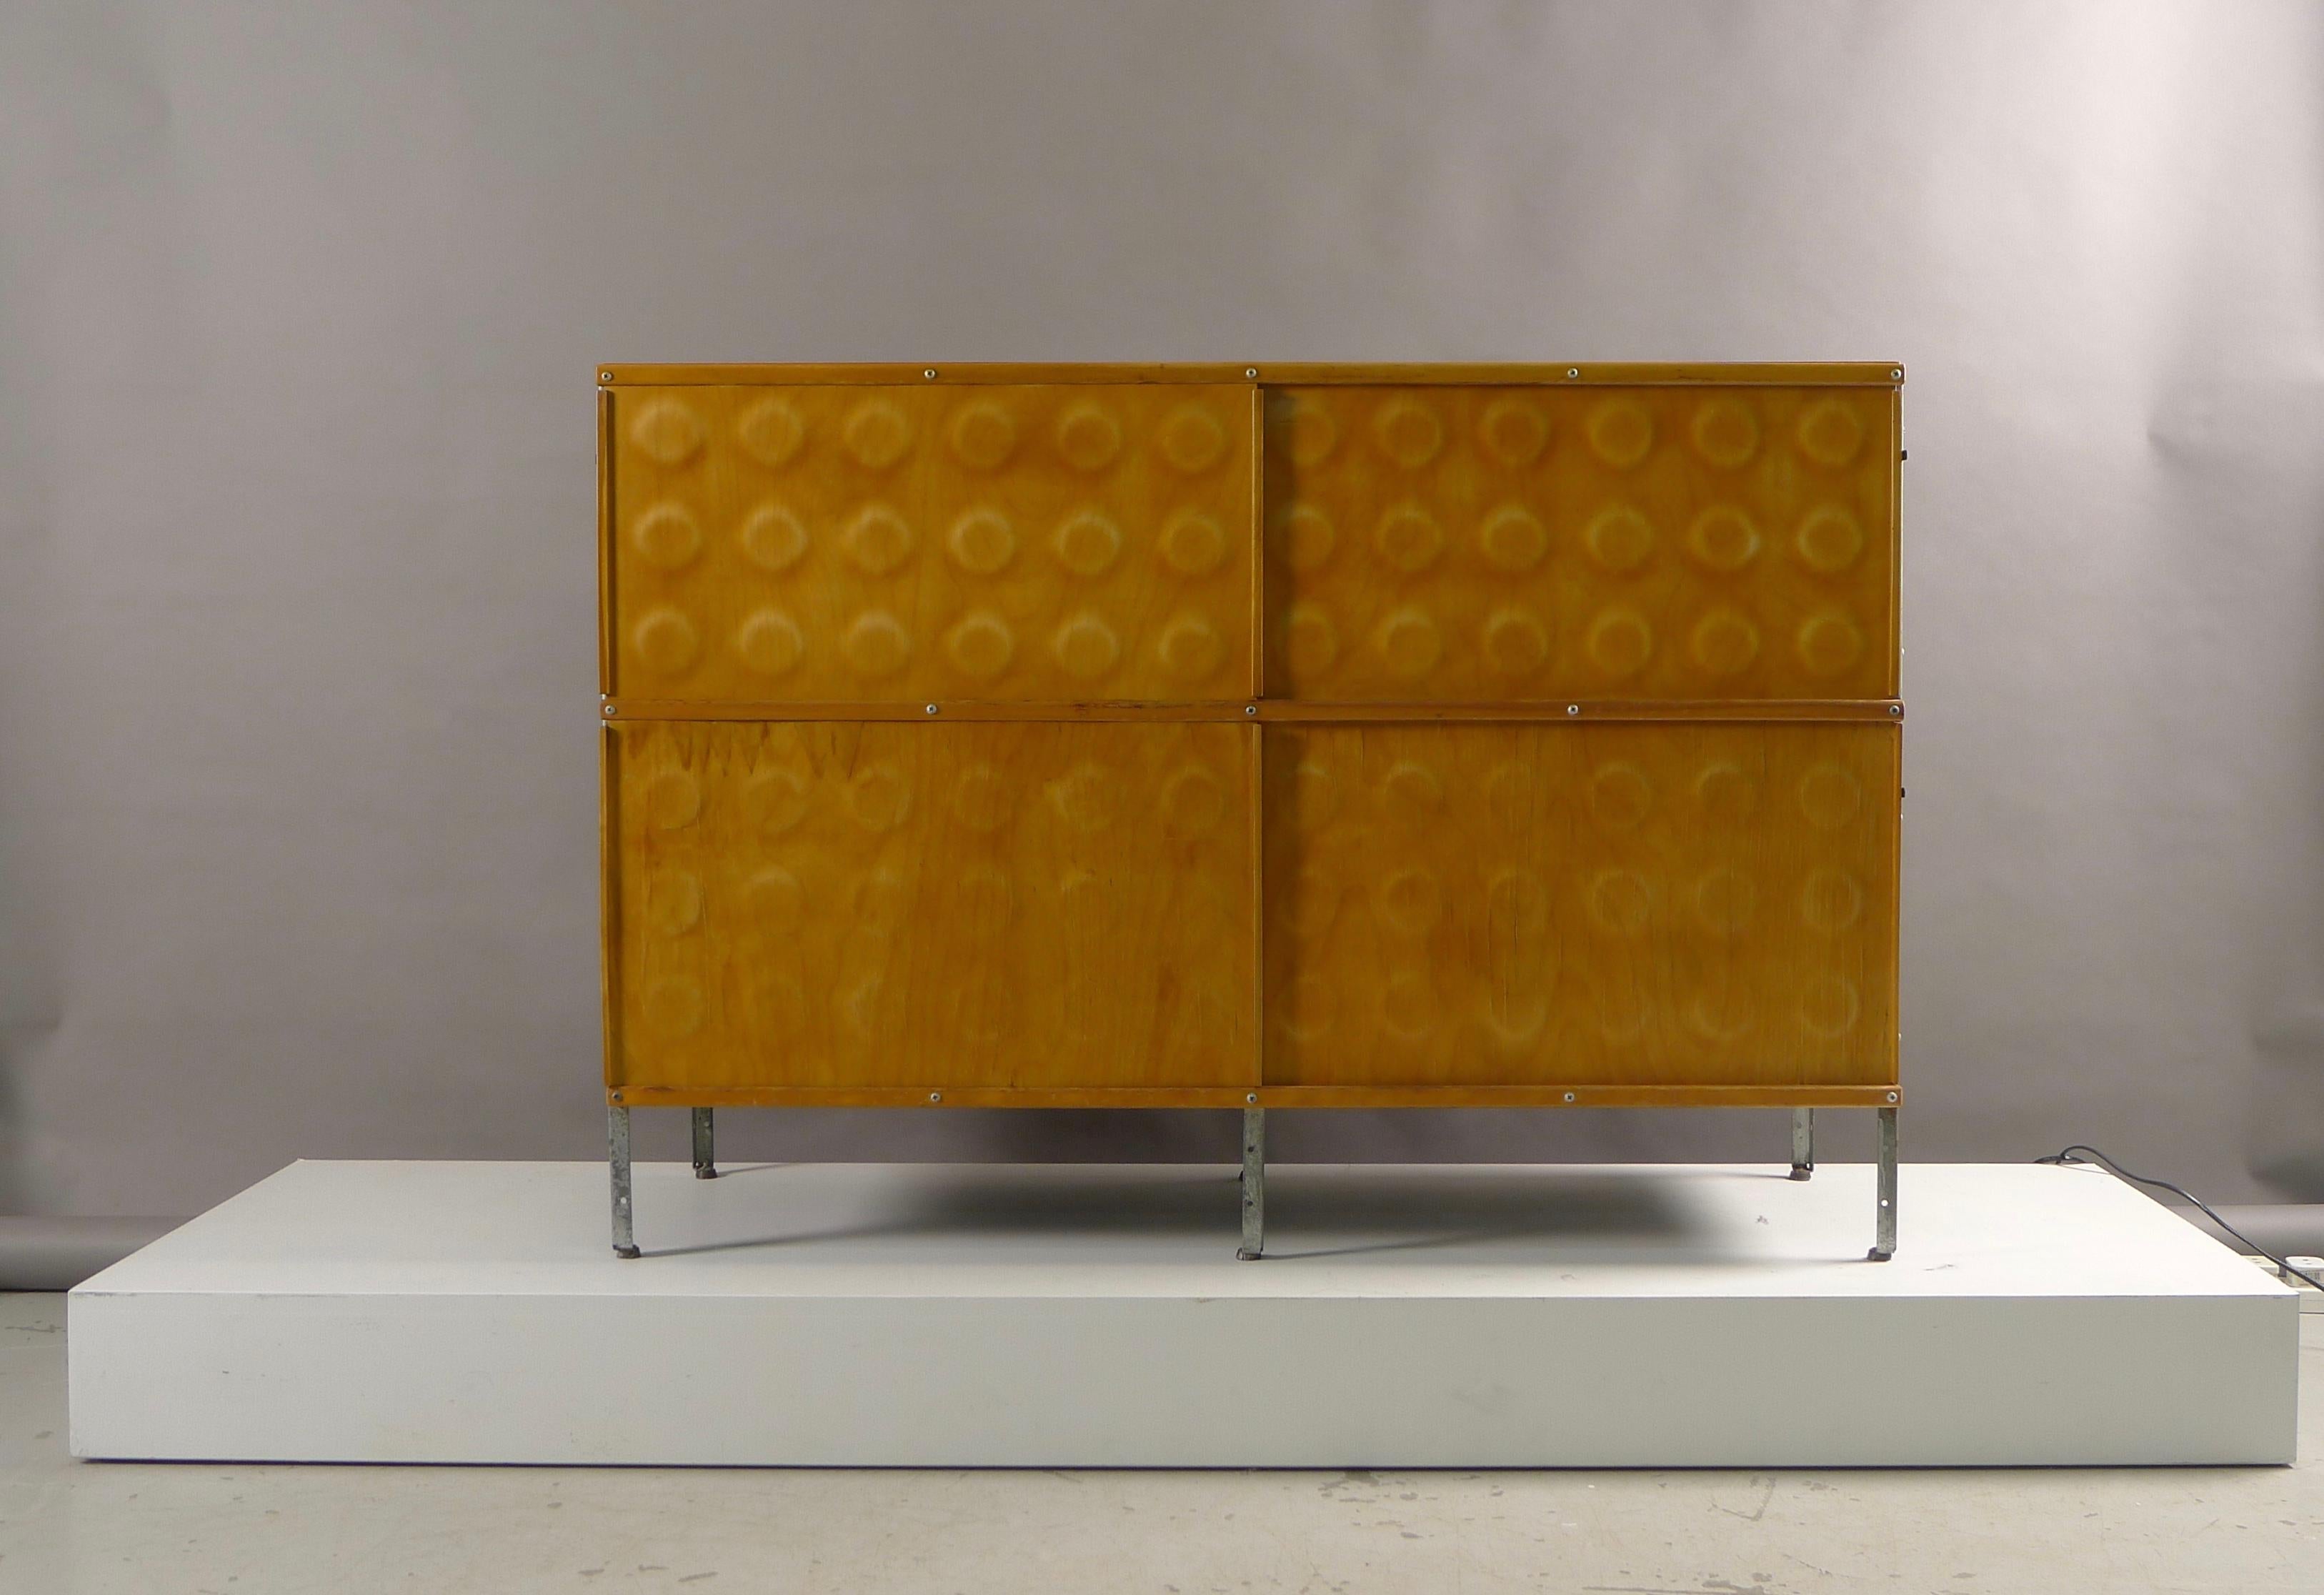 Charles and Ray Eames for Herman Miller, USA. From the 200 series of storage units, this 240-N features top and bottom pressed plywood dimple doors, plywood top with a nice honeyed patination. Zinc plated steel legs and masonite panels. Sides are